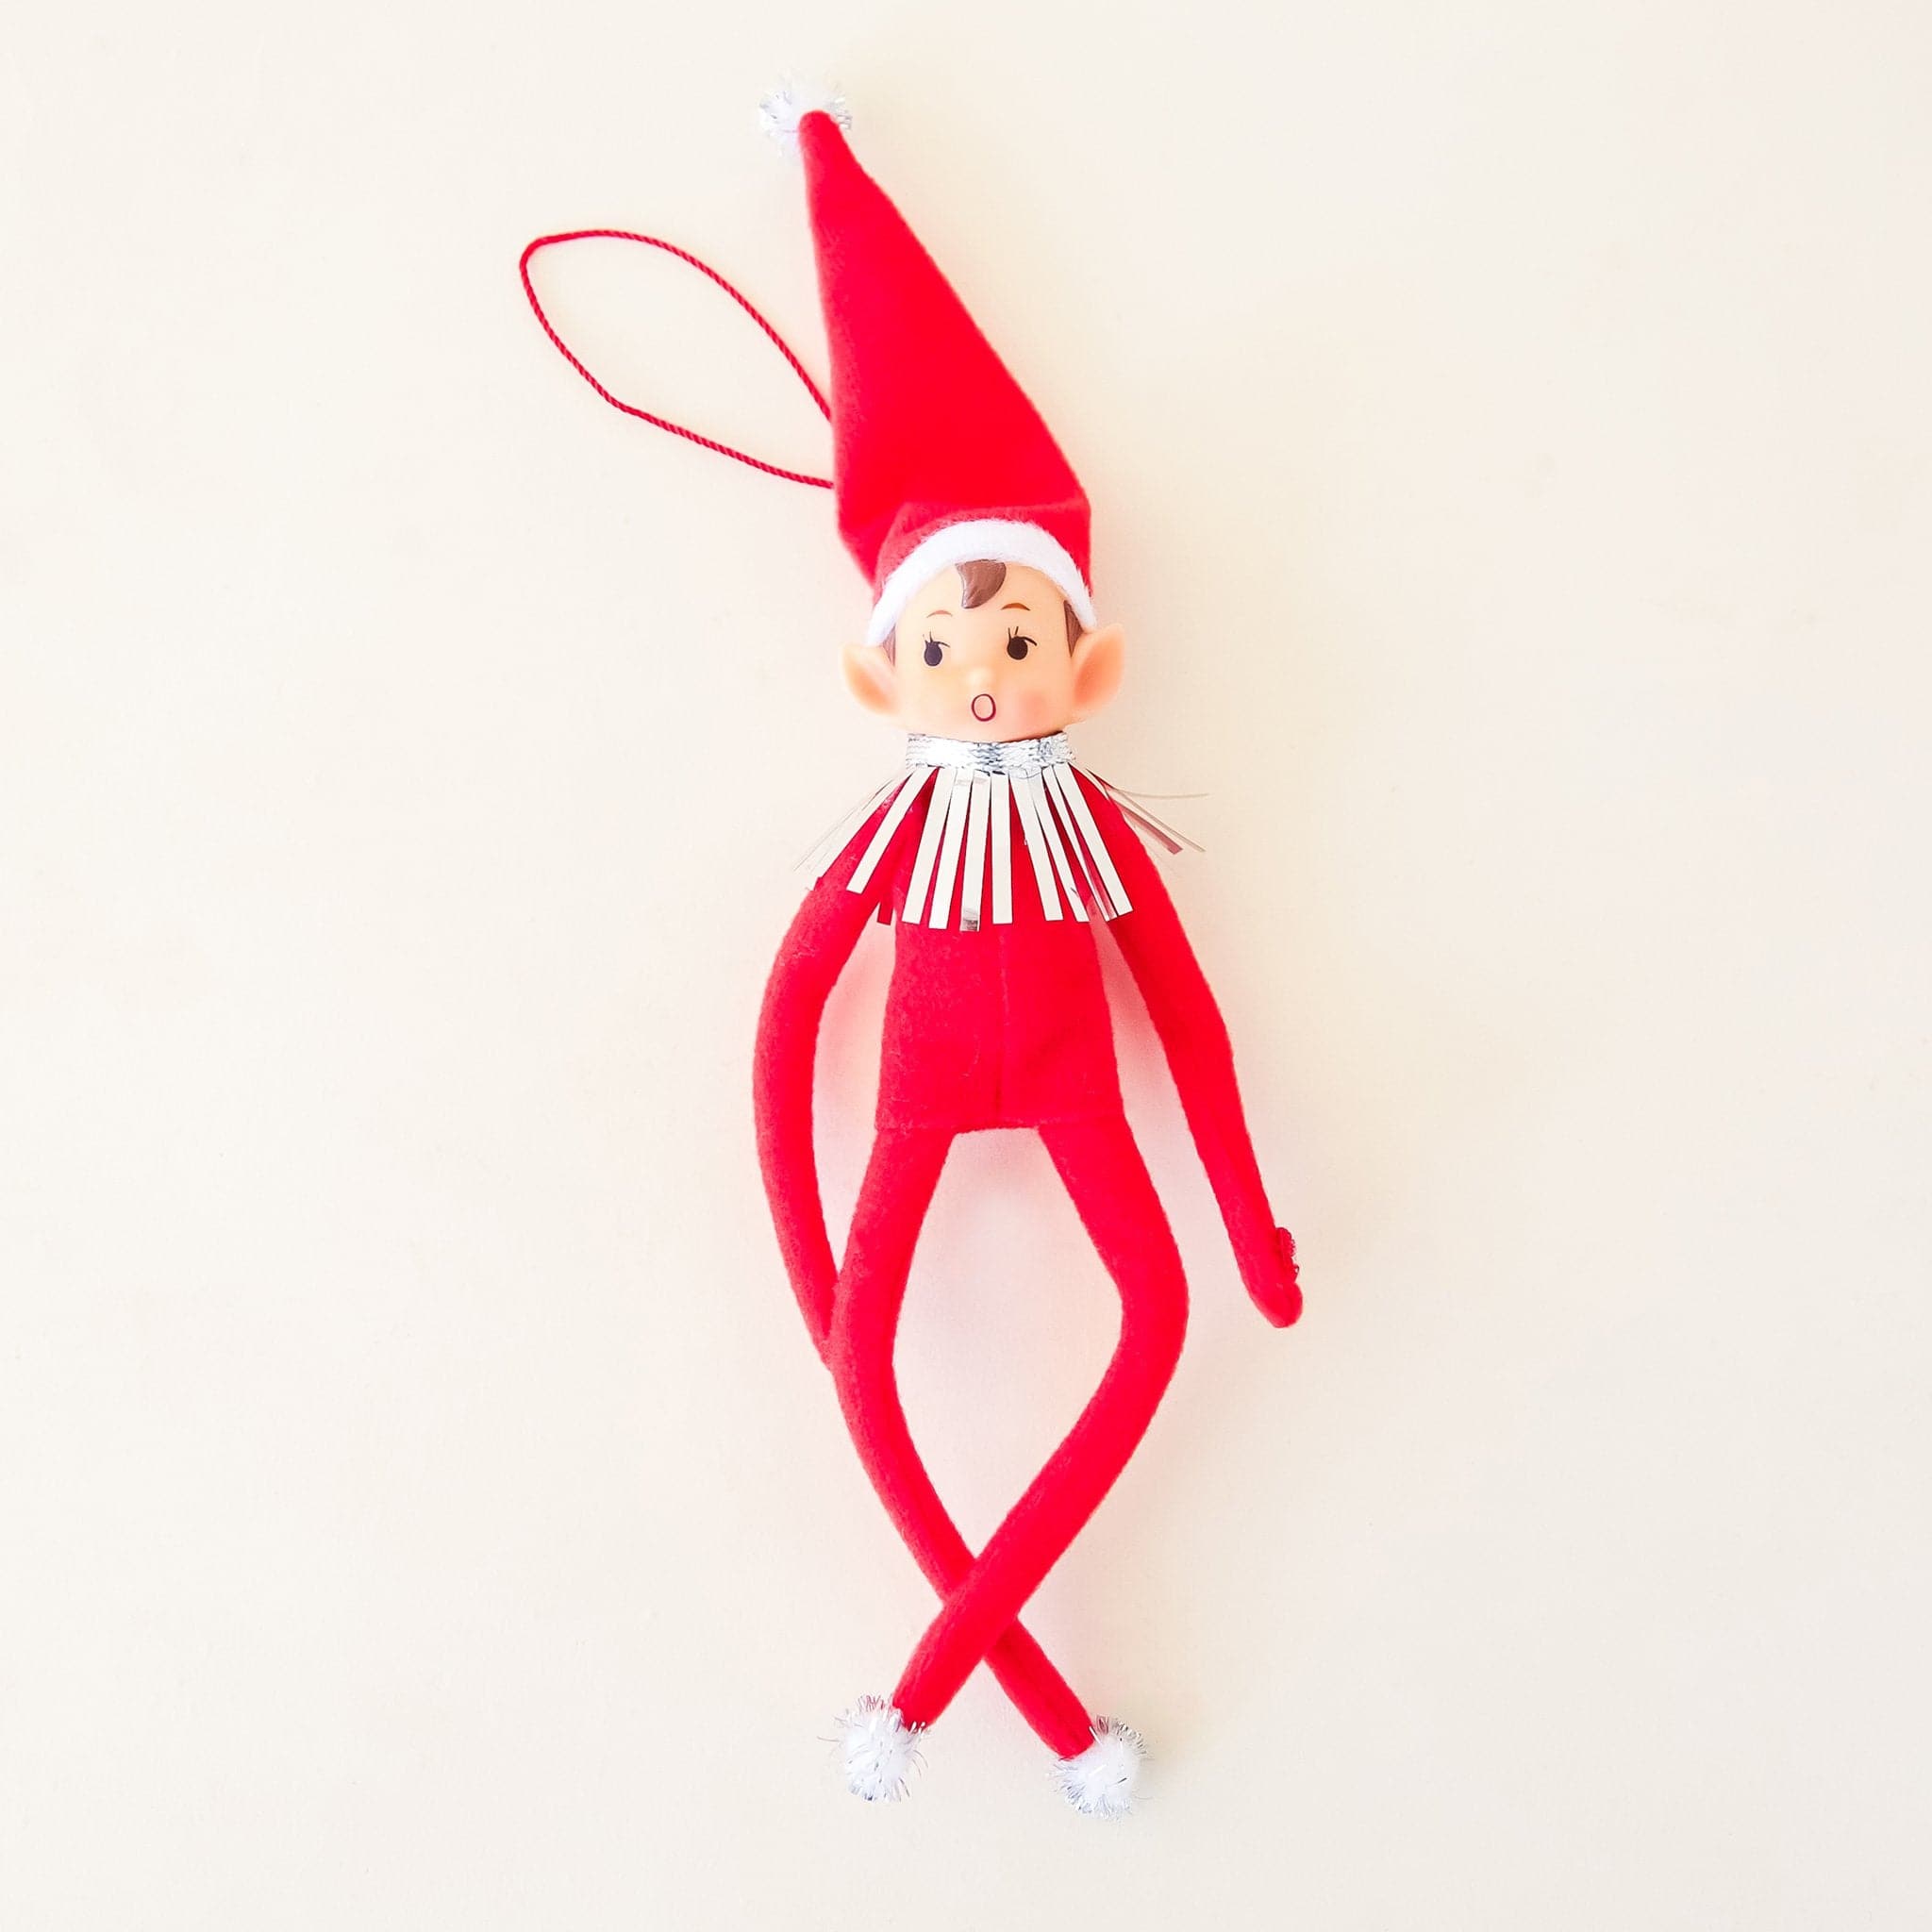 On a cream background is a red elf ornament with bendy arms and legs and a red loop for hanging.